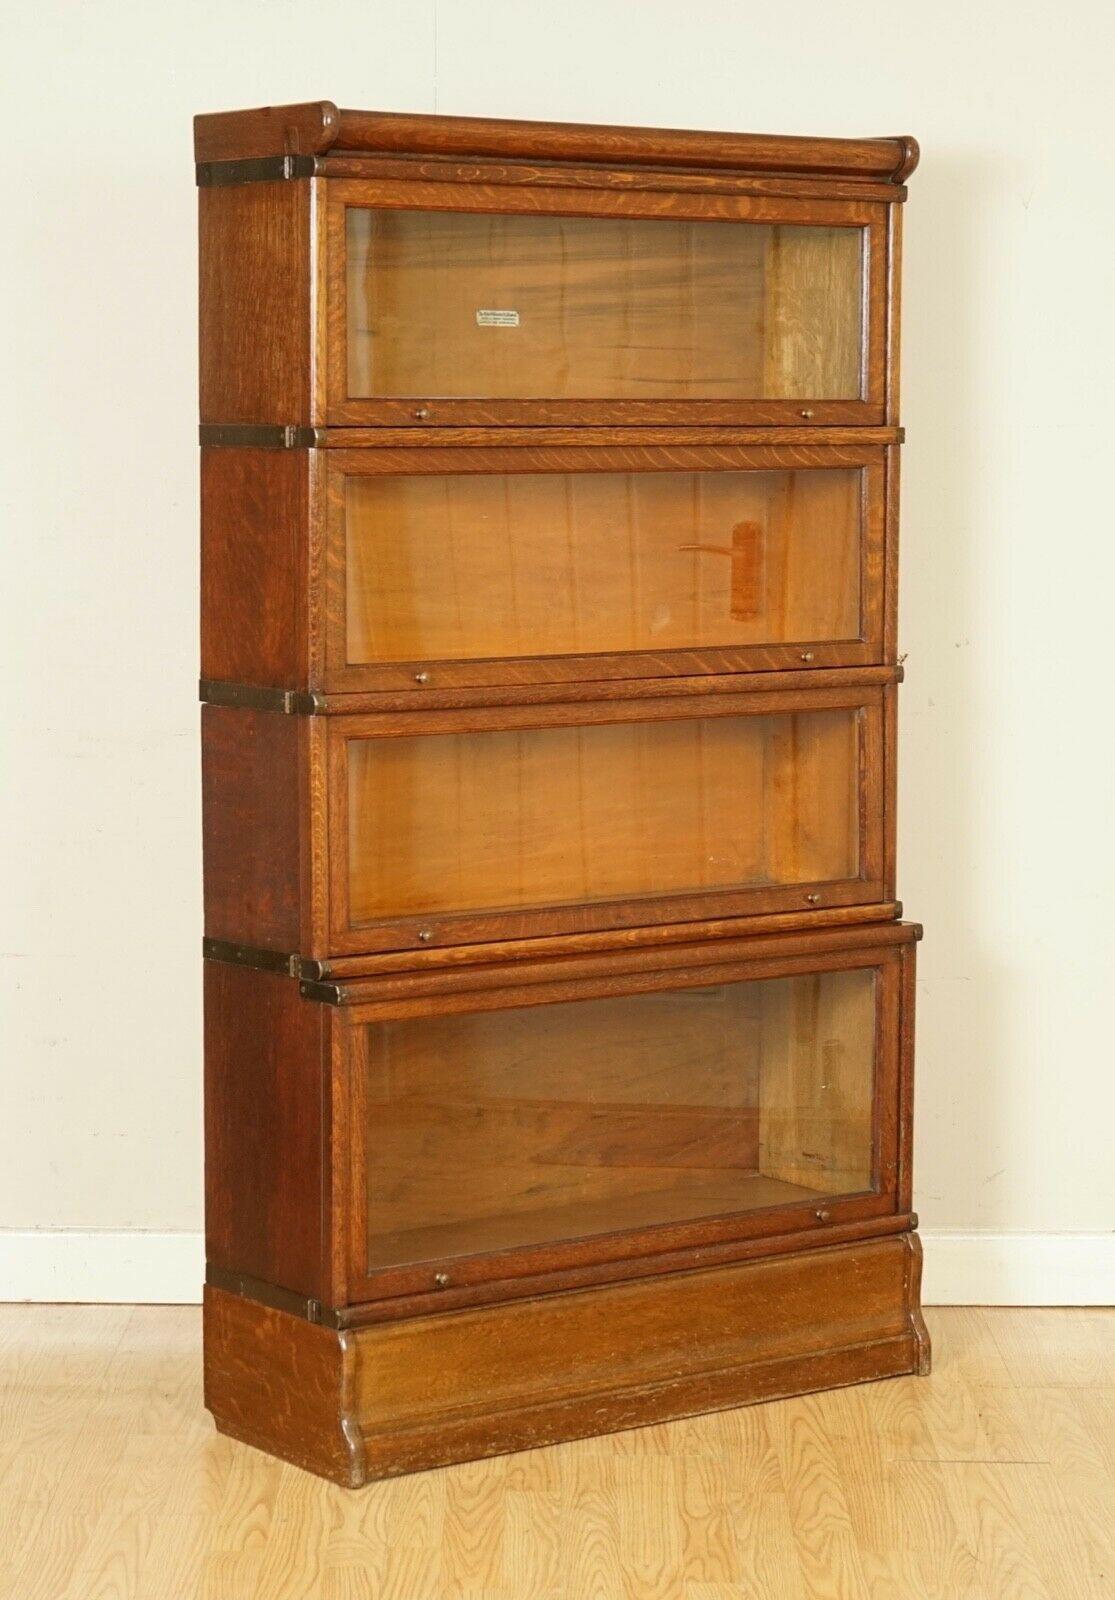 We are delighted to offer for sale this Stunning Antique Oak Original Globe Wernicke Four Barristers Bookcase Circa 1920's
A very well made piece, highly desirable especially in this condition.
We have lightly restored this by giving it a hand